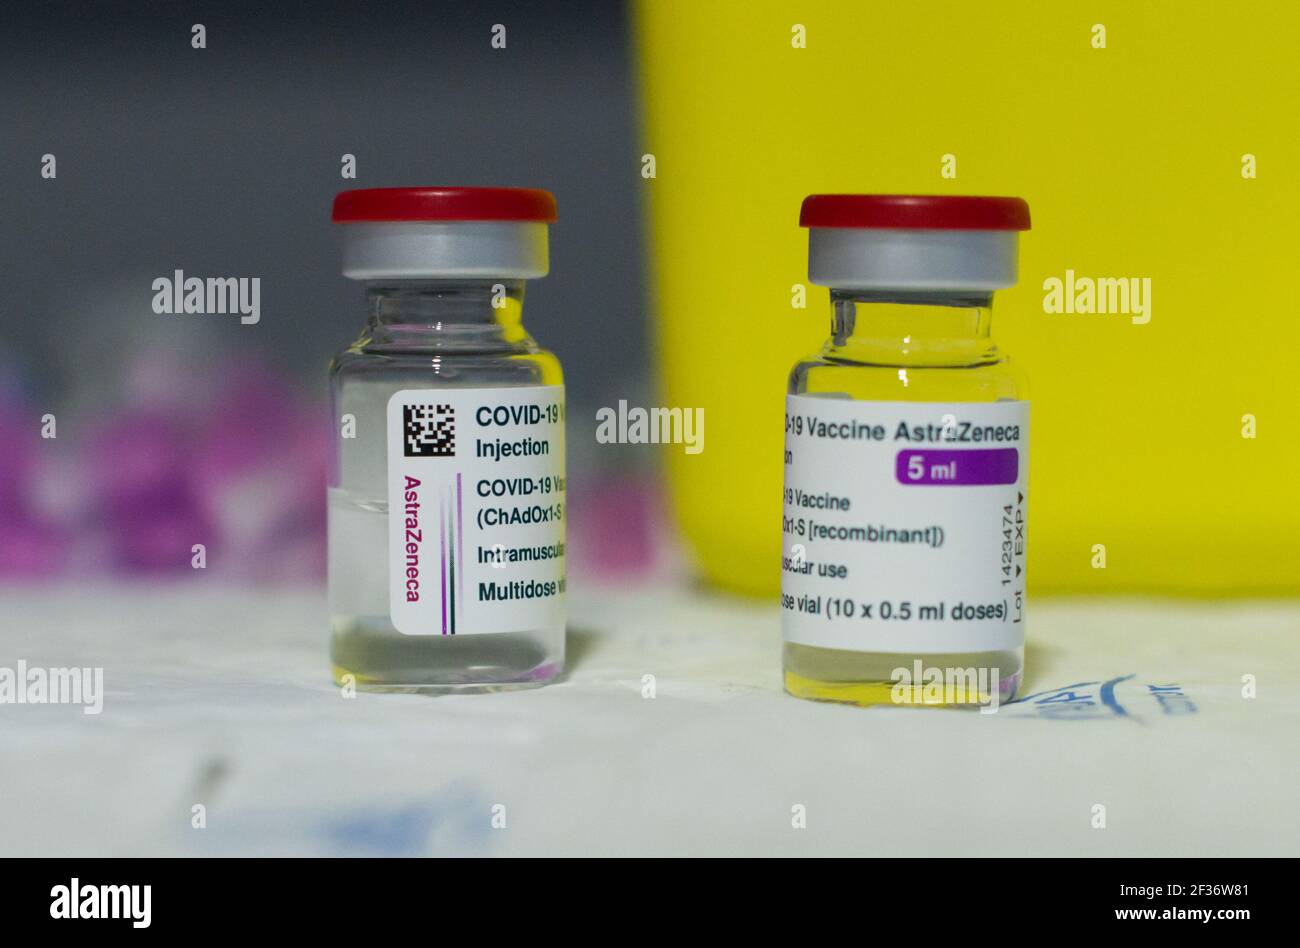 AstraZeneca COVID19 vaccine Vials seen during the vaccination exercise of frontline workers at Coria City Hospital. Some European countries have cancelled the administration of AstraZeneca vaccine due the appearance of some side effects in people who had received it recently. Stock Photo